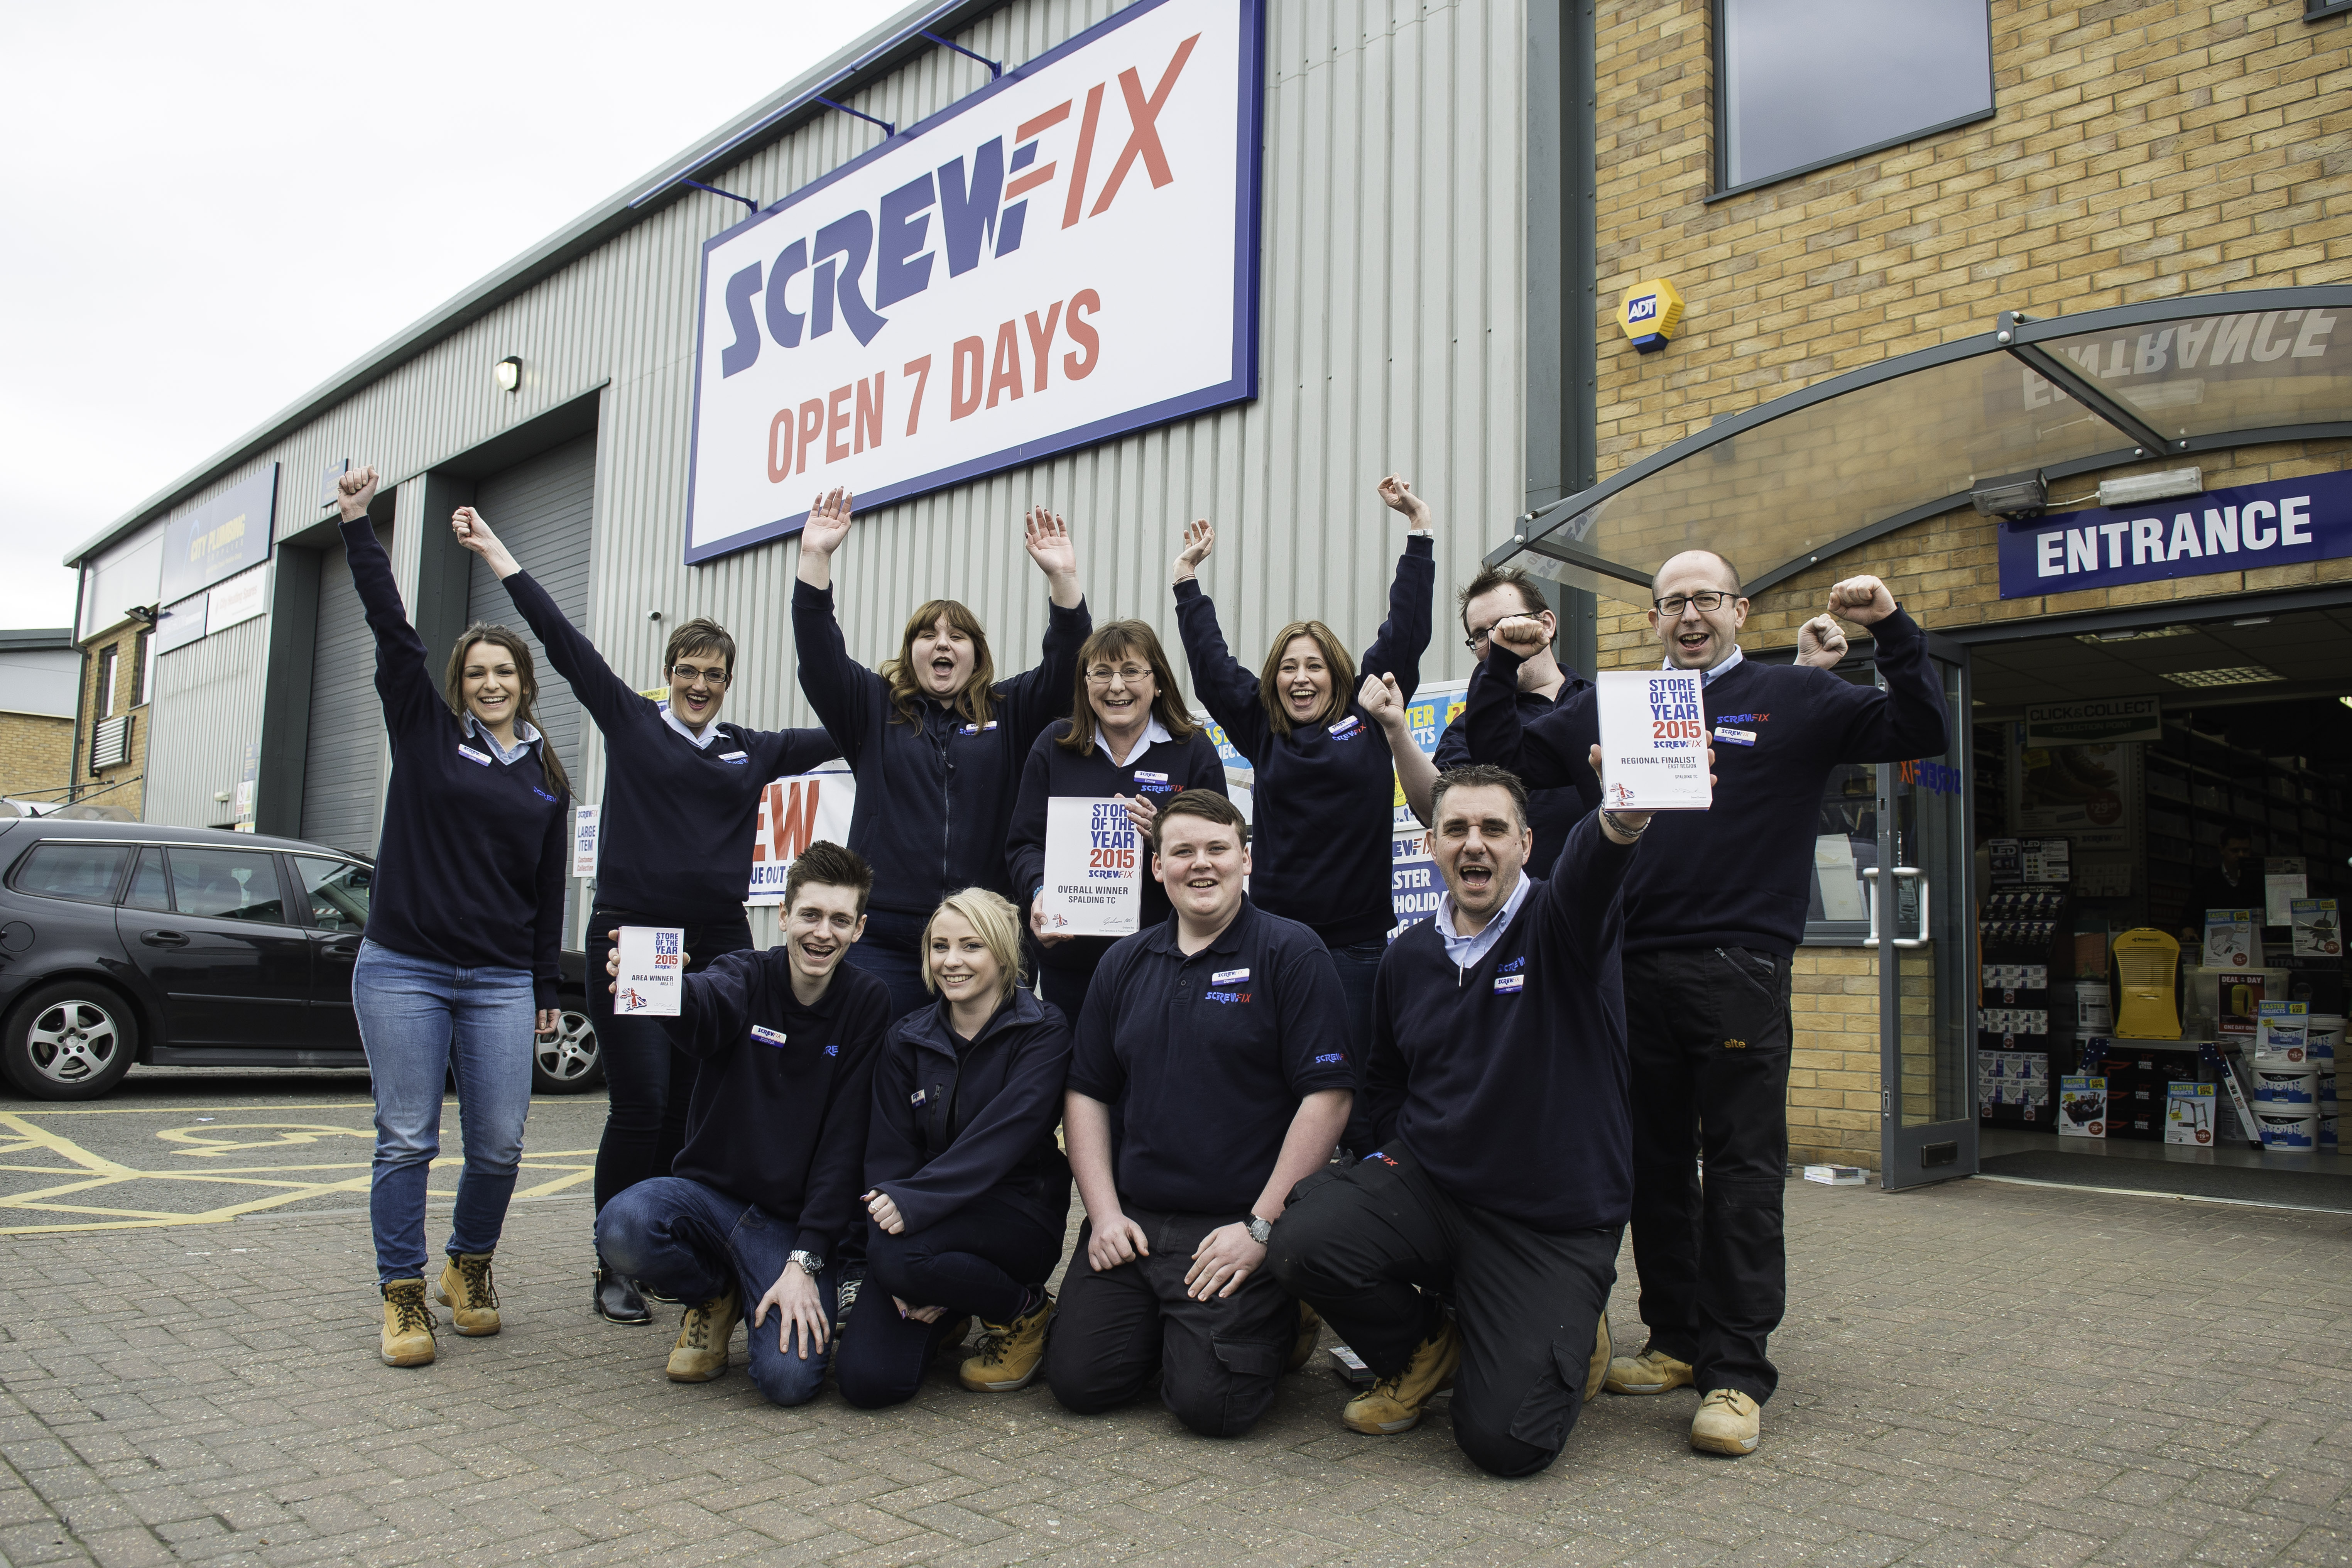 Spalding Screwfix store is best in the UK